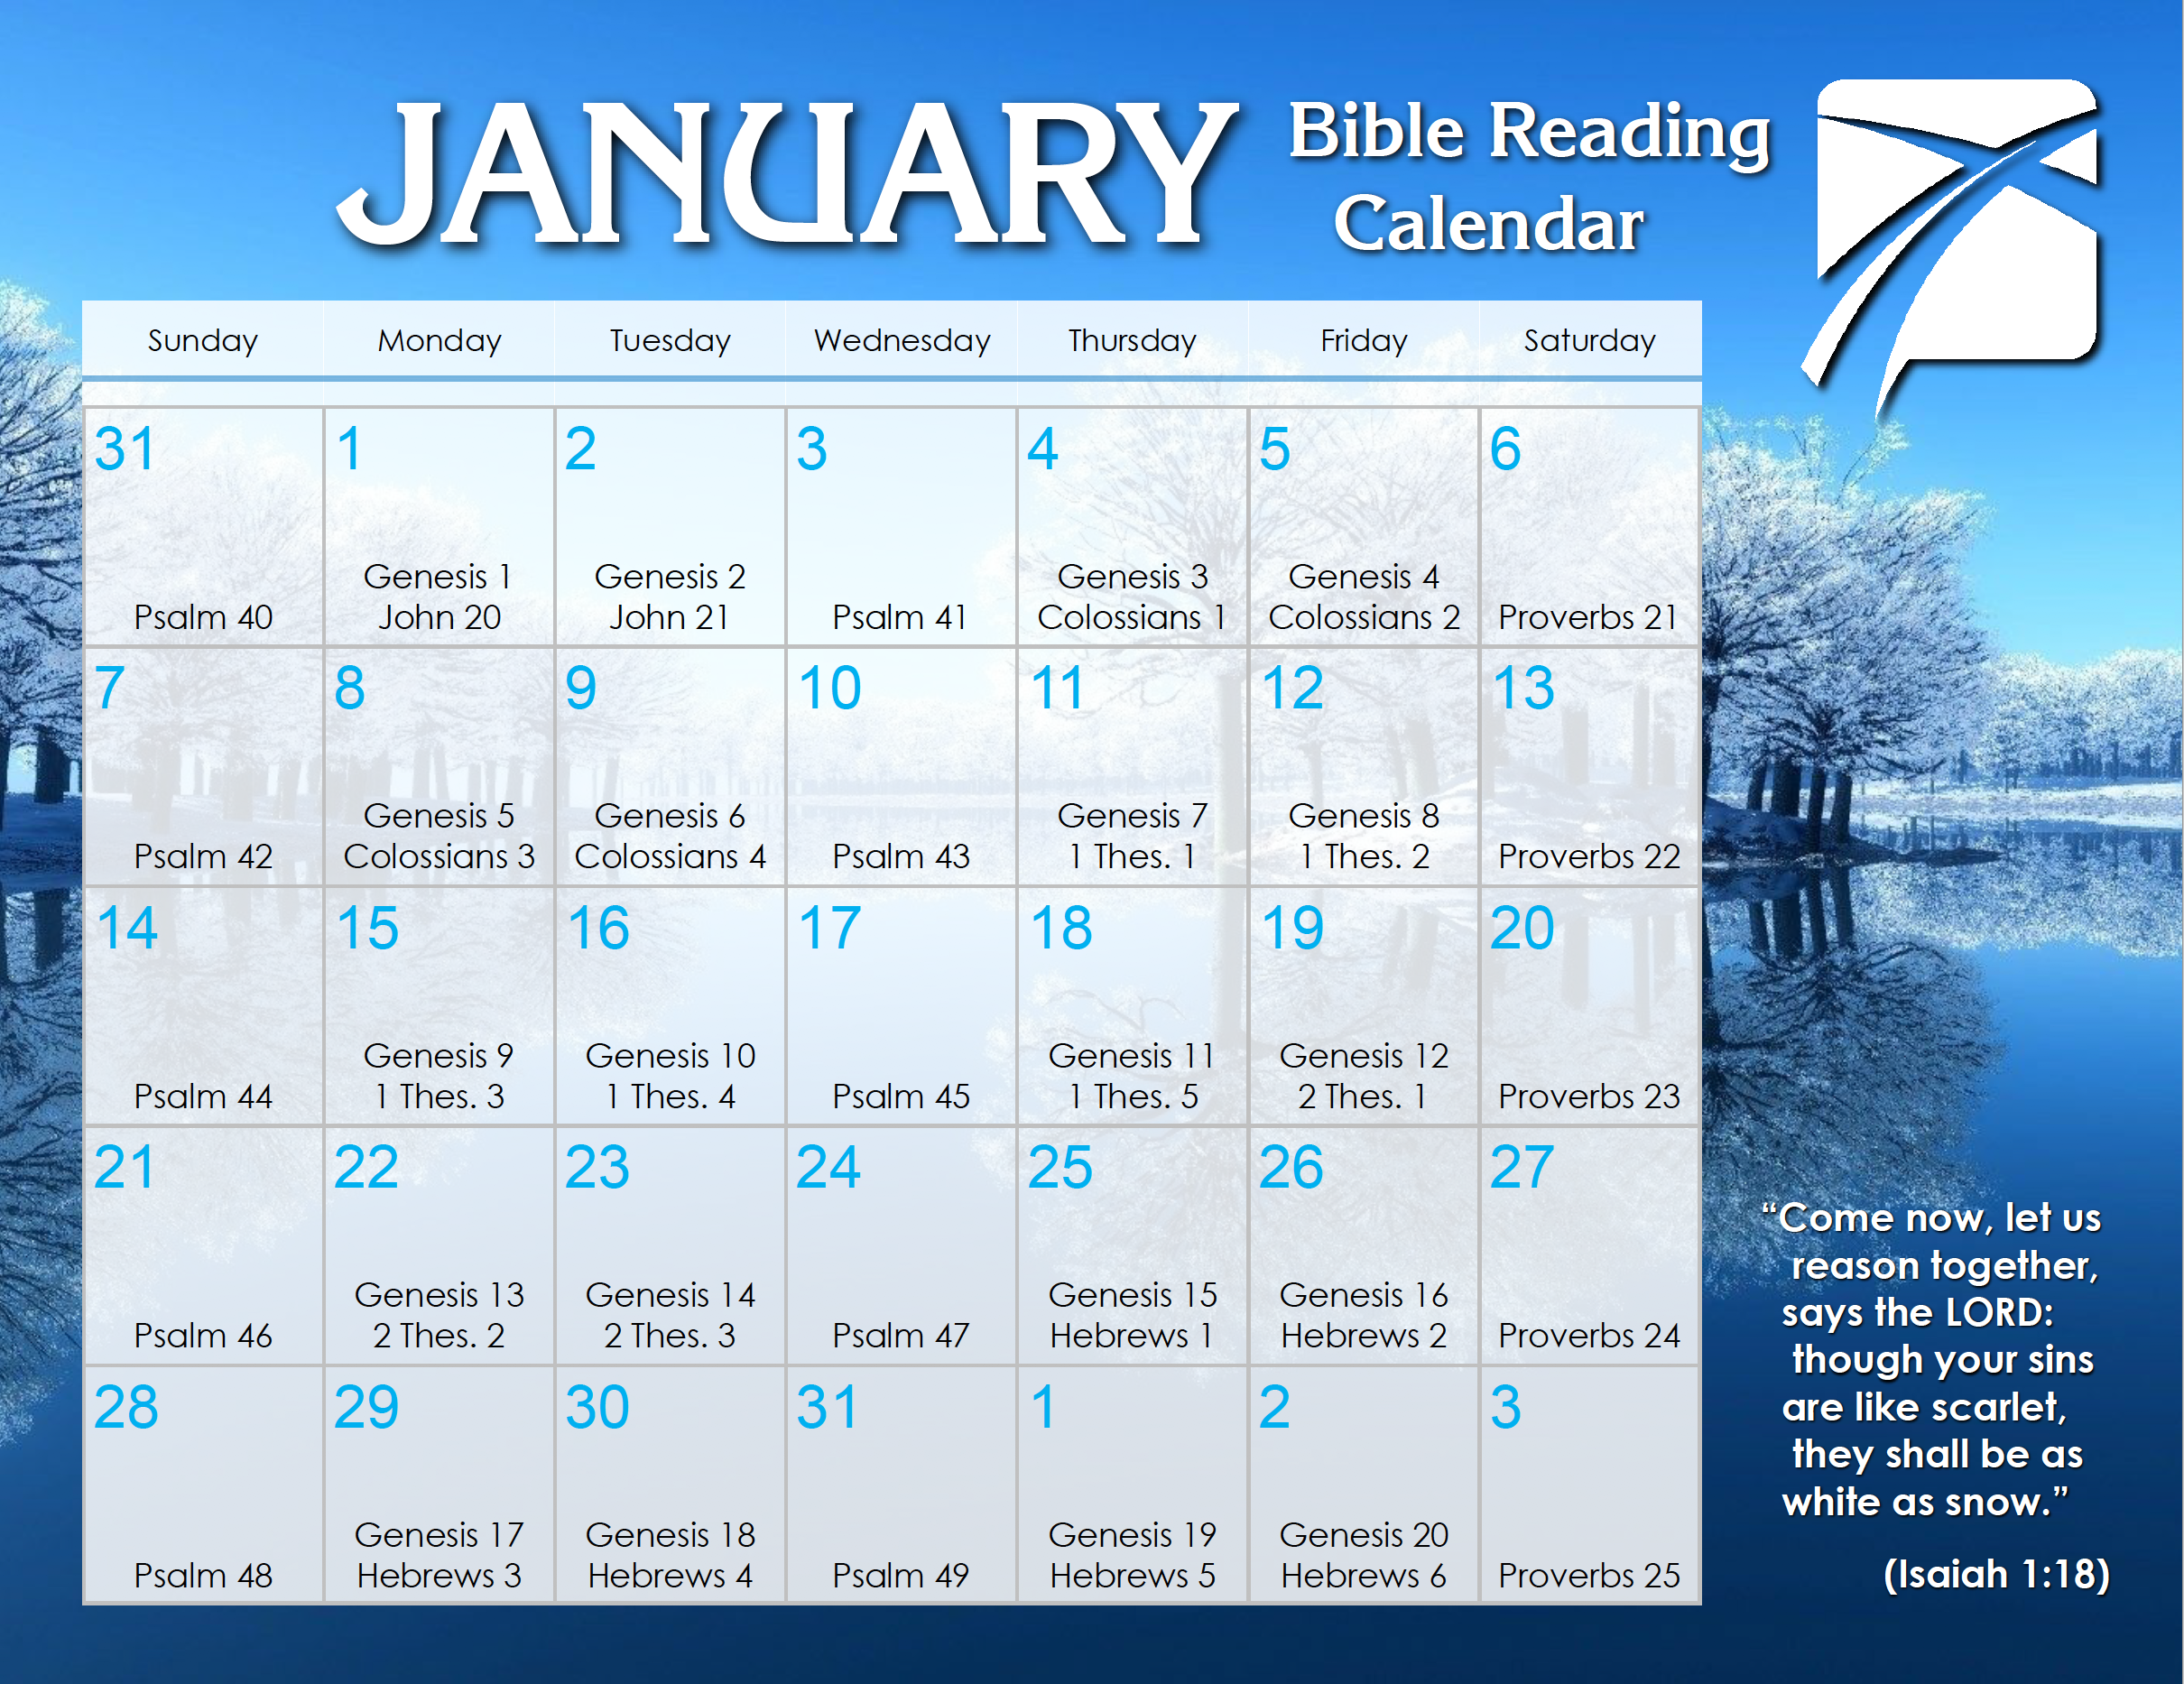 January 2018 Daily Bible Reading Calendar In God #39 s Image